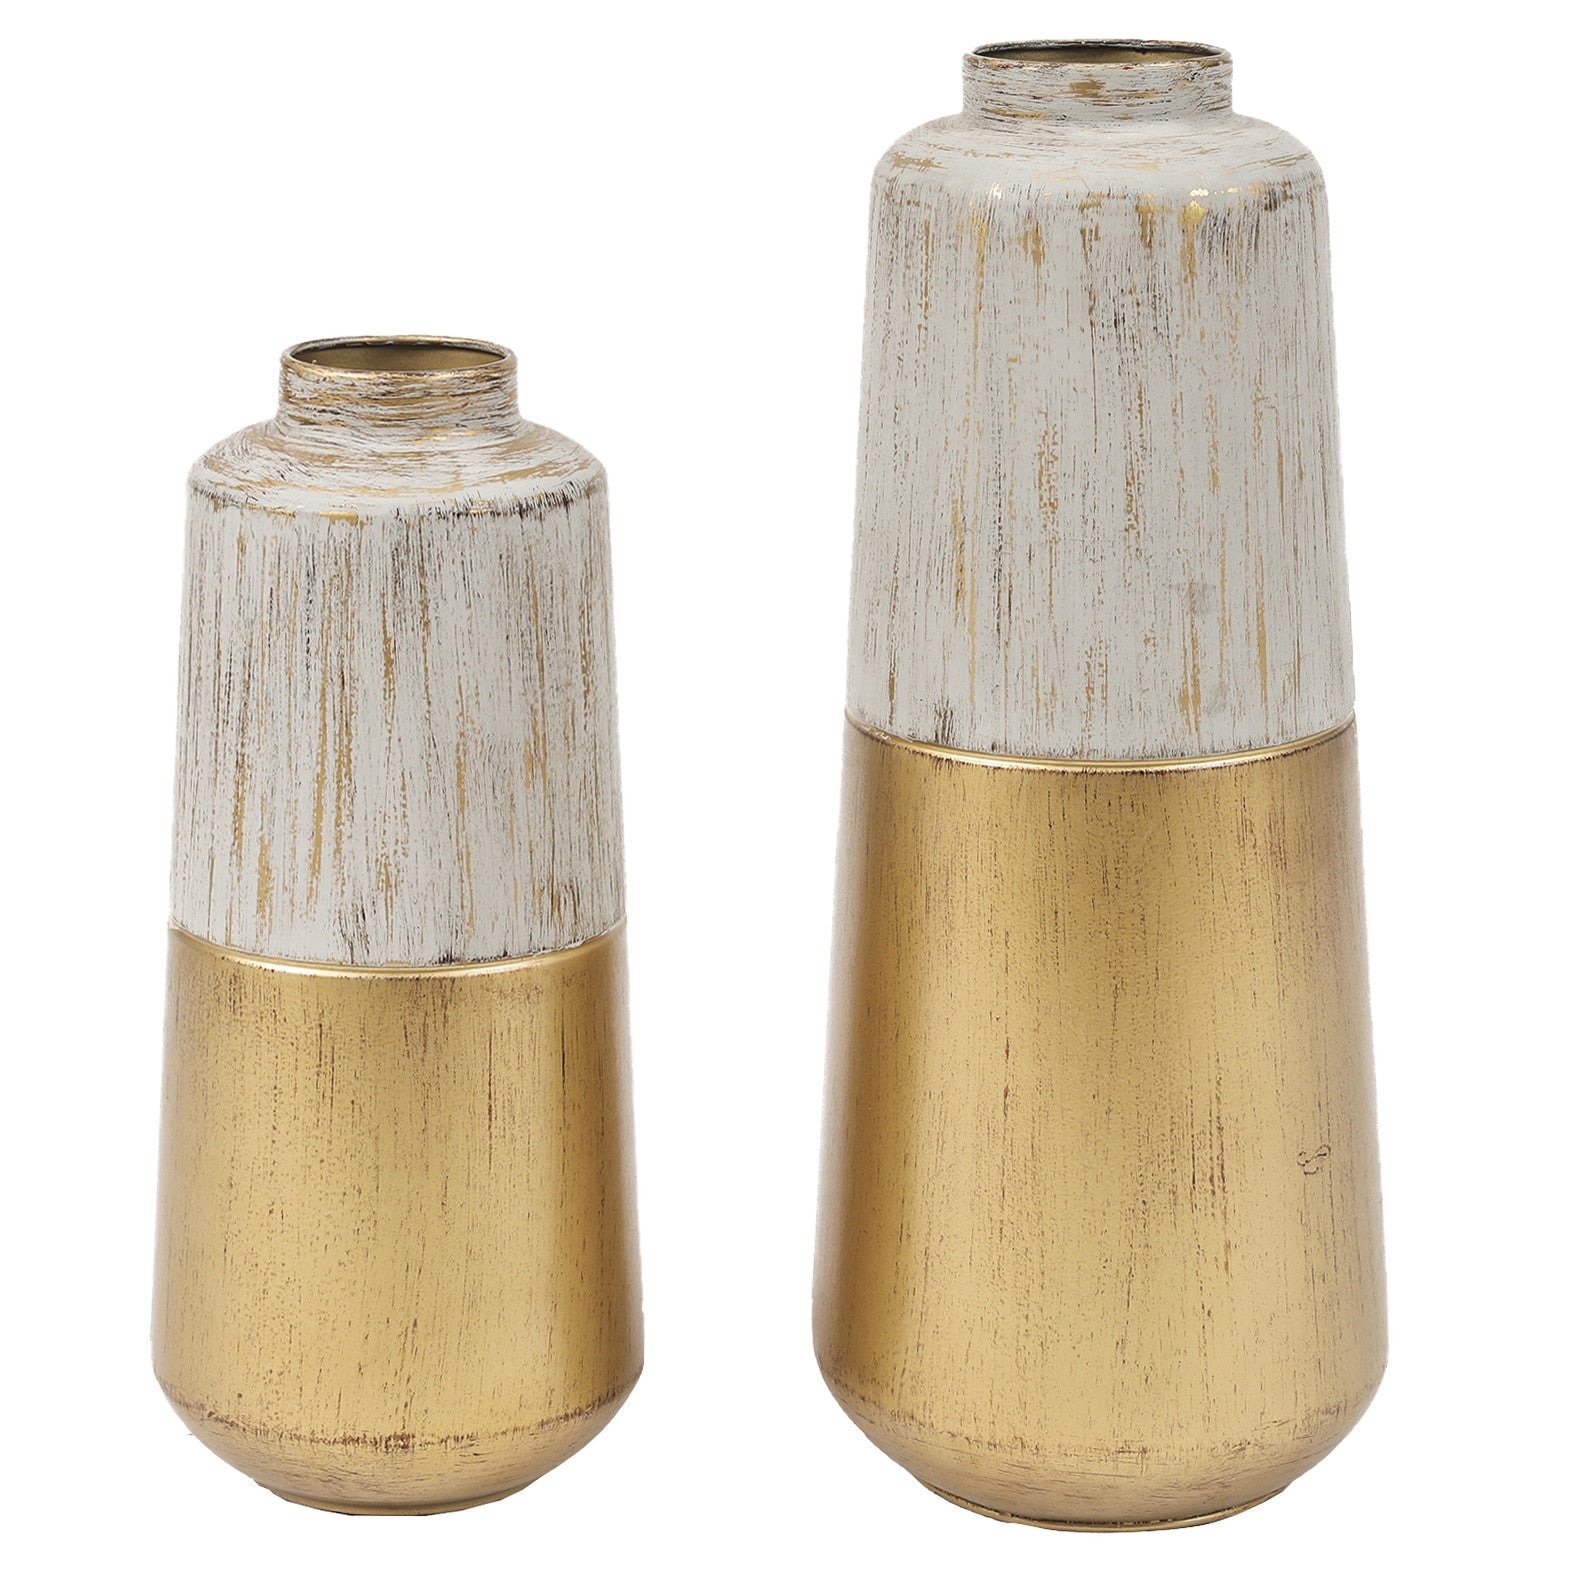 LuxenHome Floor Vases Decorative Tall, Rustic Metal Tall Floor Vase, Set of  2 Distressed Off White and Brown Vases for Decor, Farmhouse Vase for Home  Decor, Tall Vases for Decor Living Room